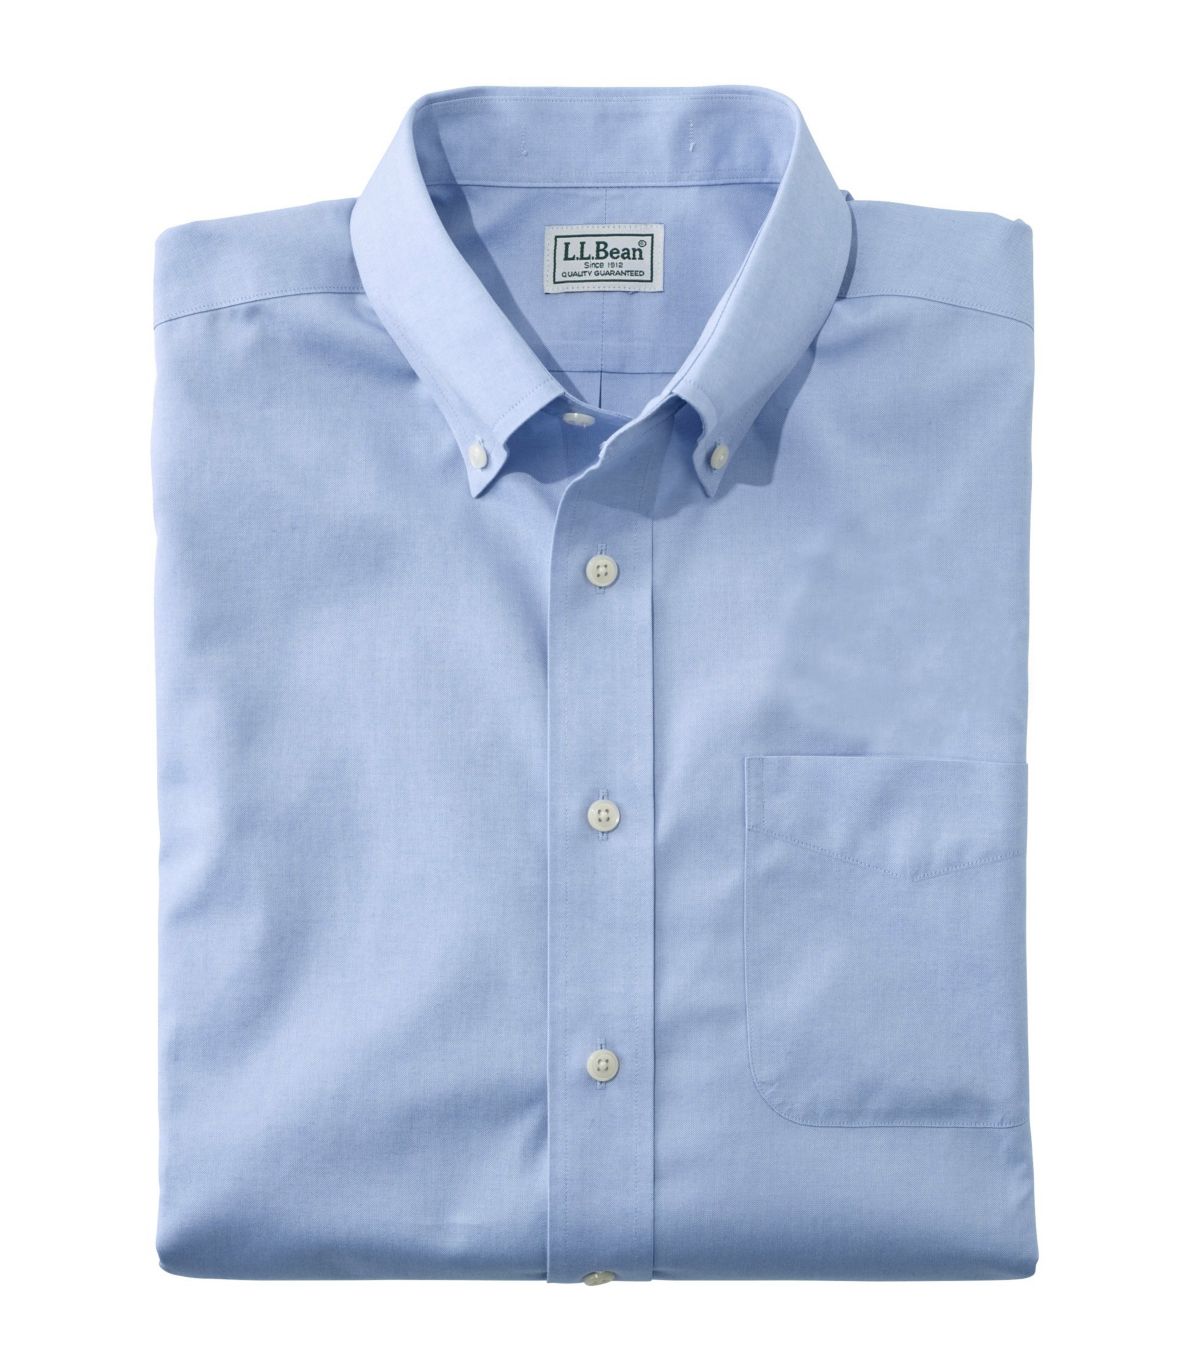 Wrinkle-Free Pinpoint Oxford Shirt